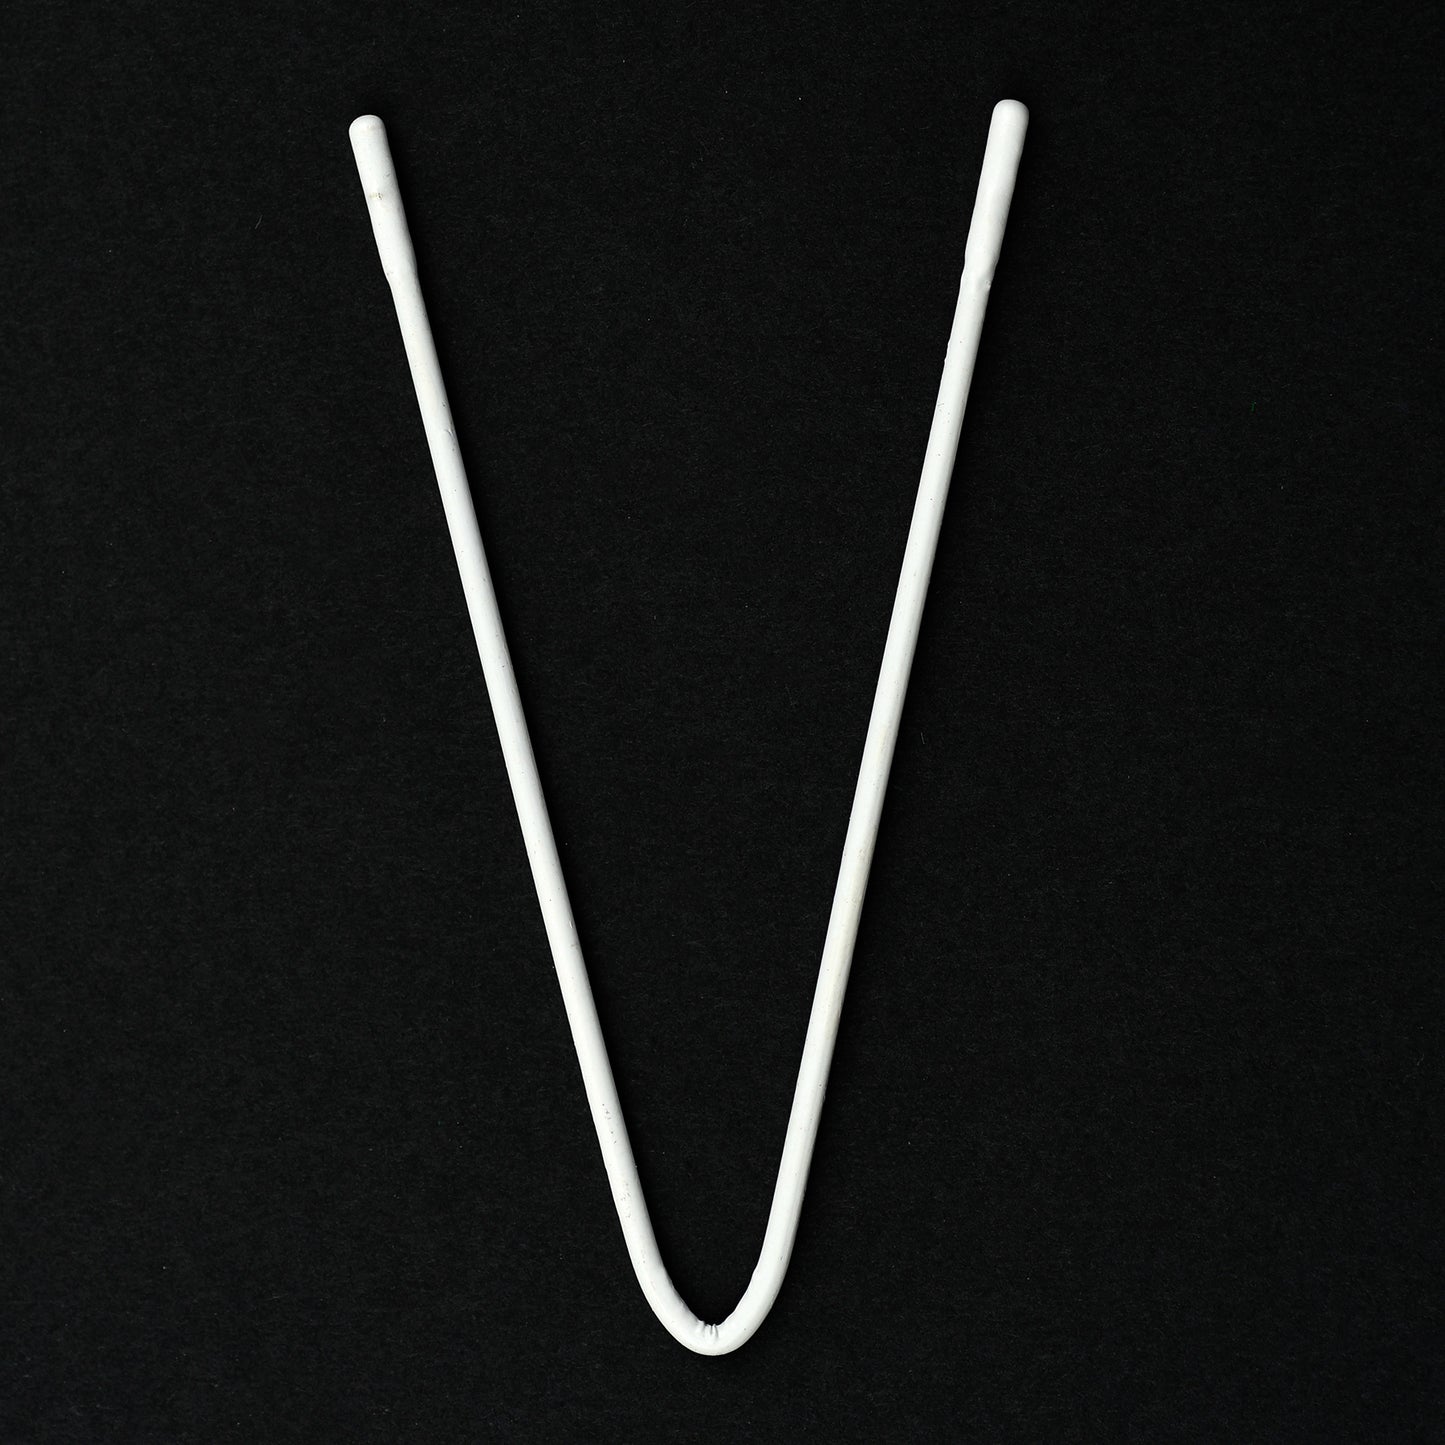 80MM x 45MM NYLON-COATED V WIRE